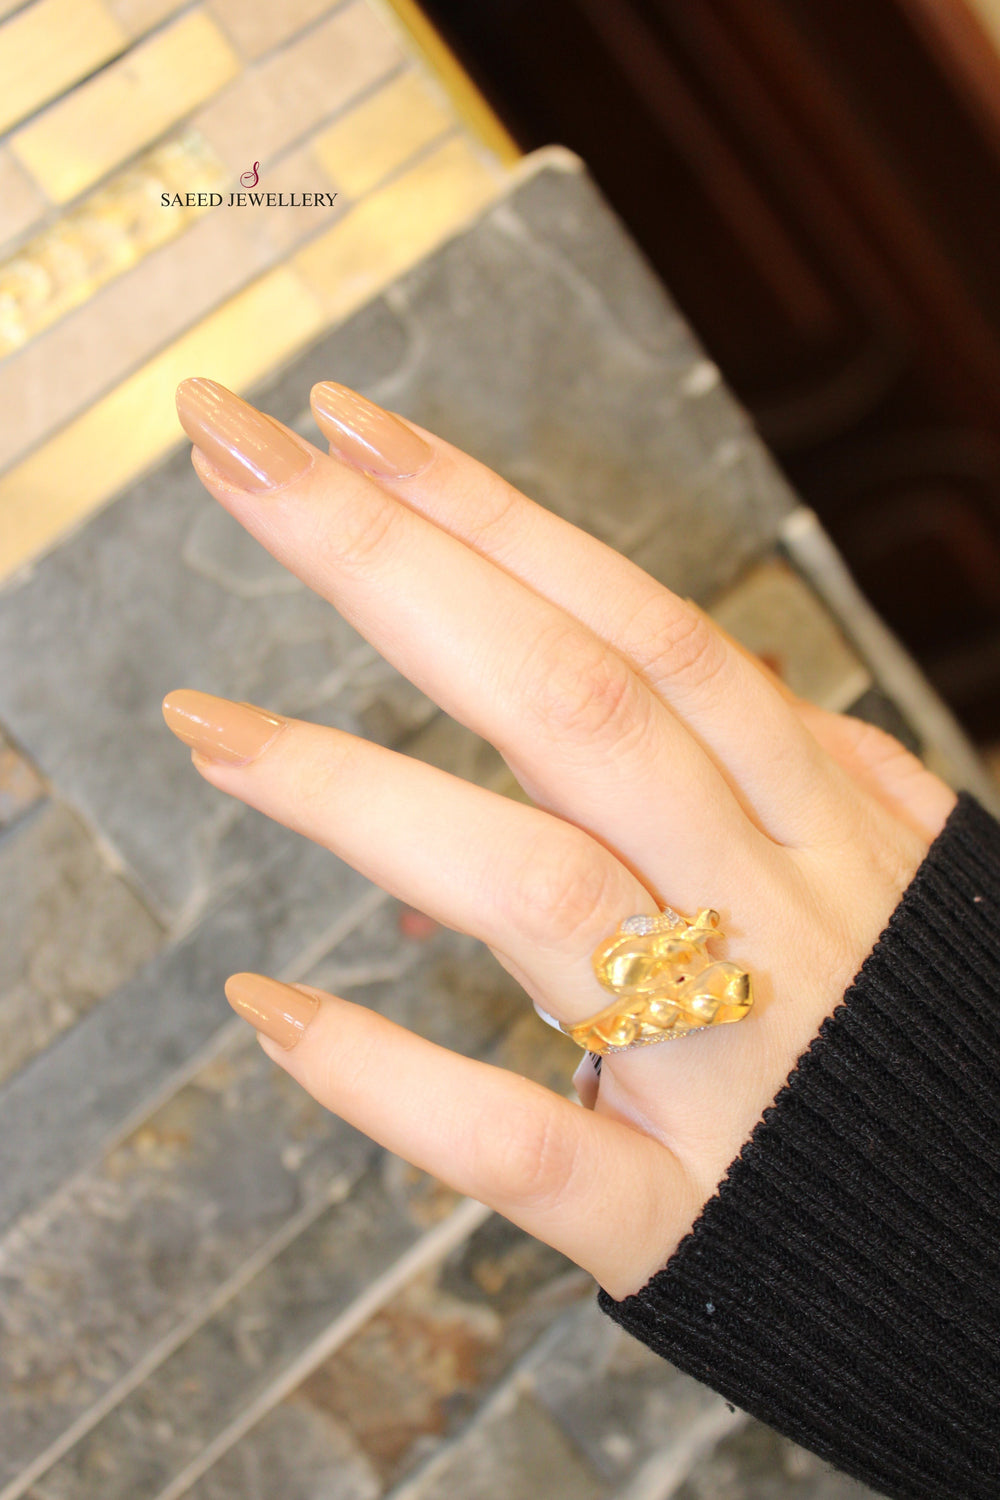 21K Fancy Zirconia Ring Made of 21K Yellow Gold by Saeed Jewelry-11633